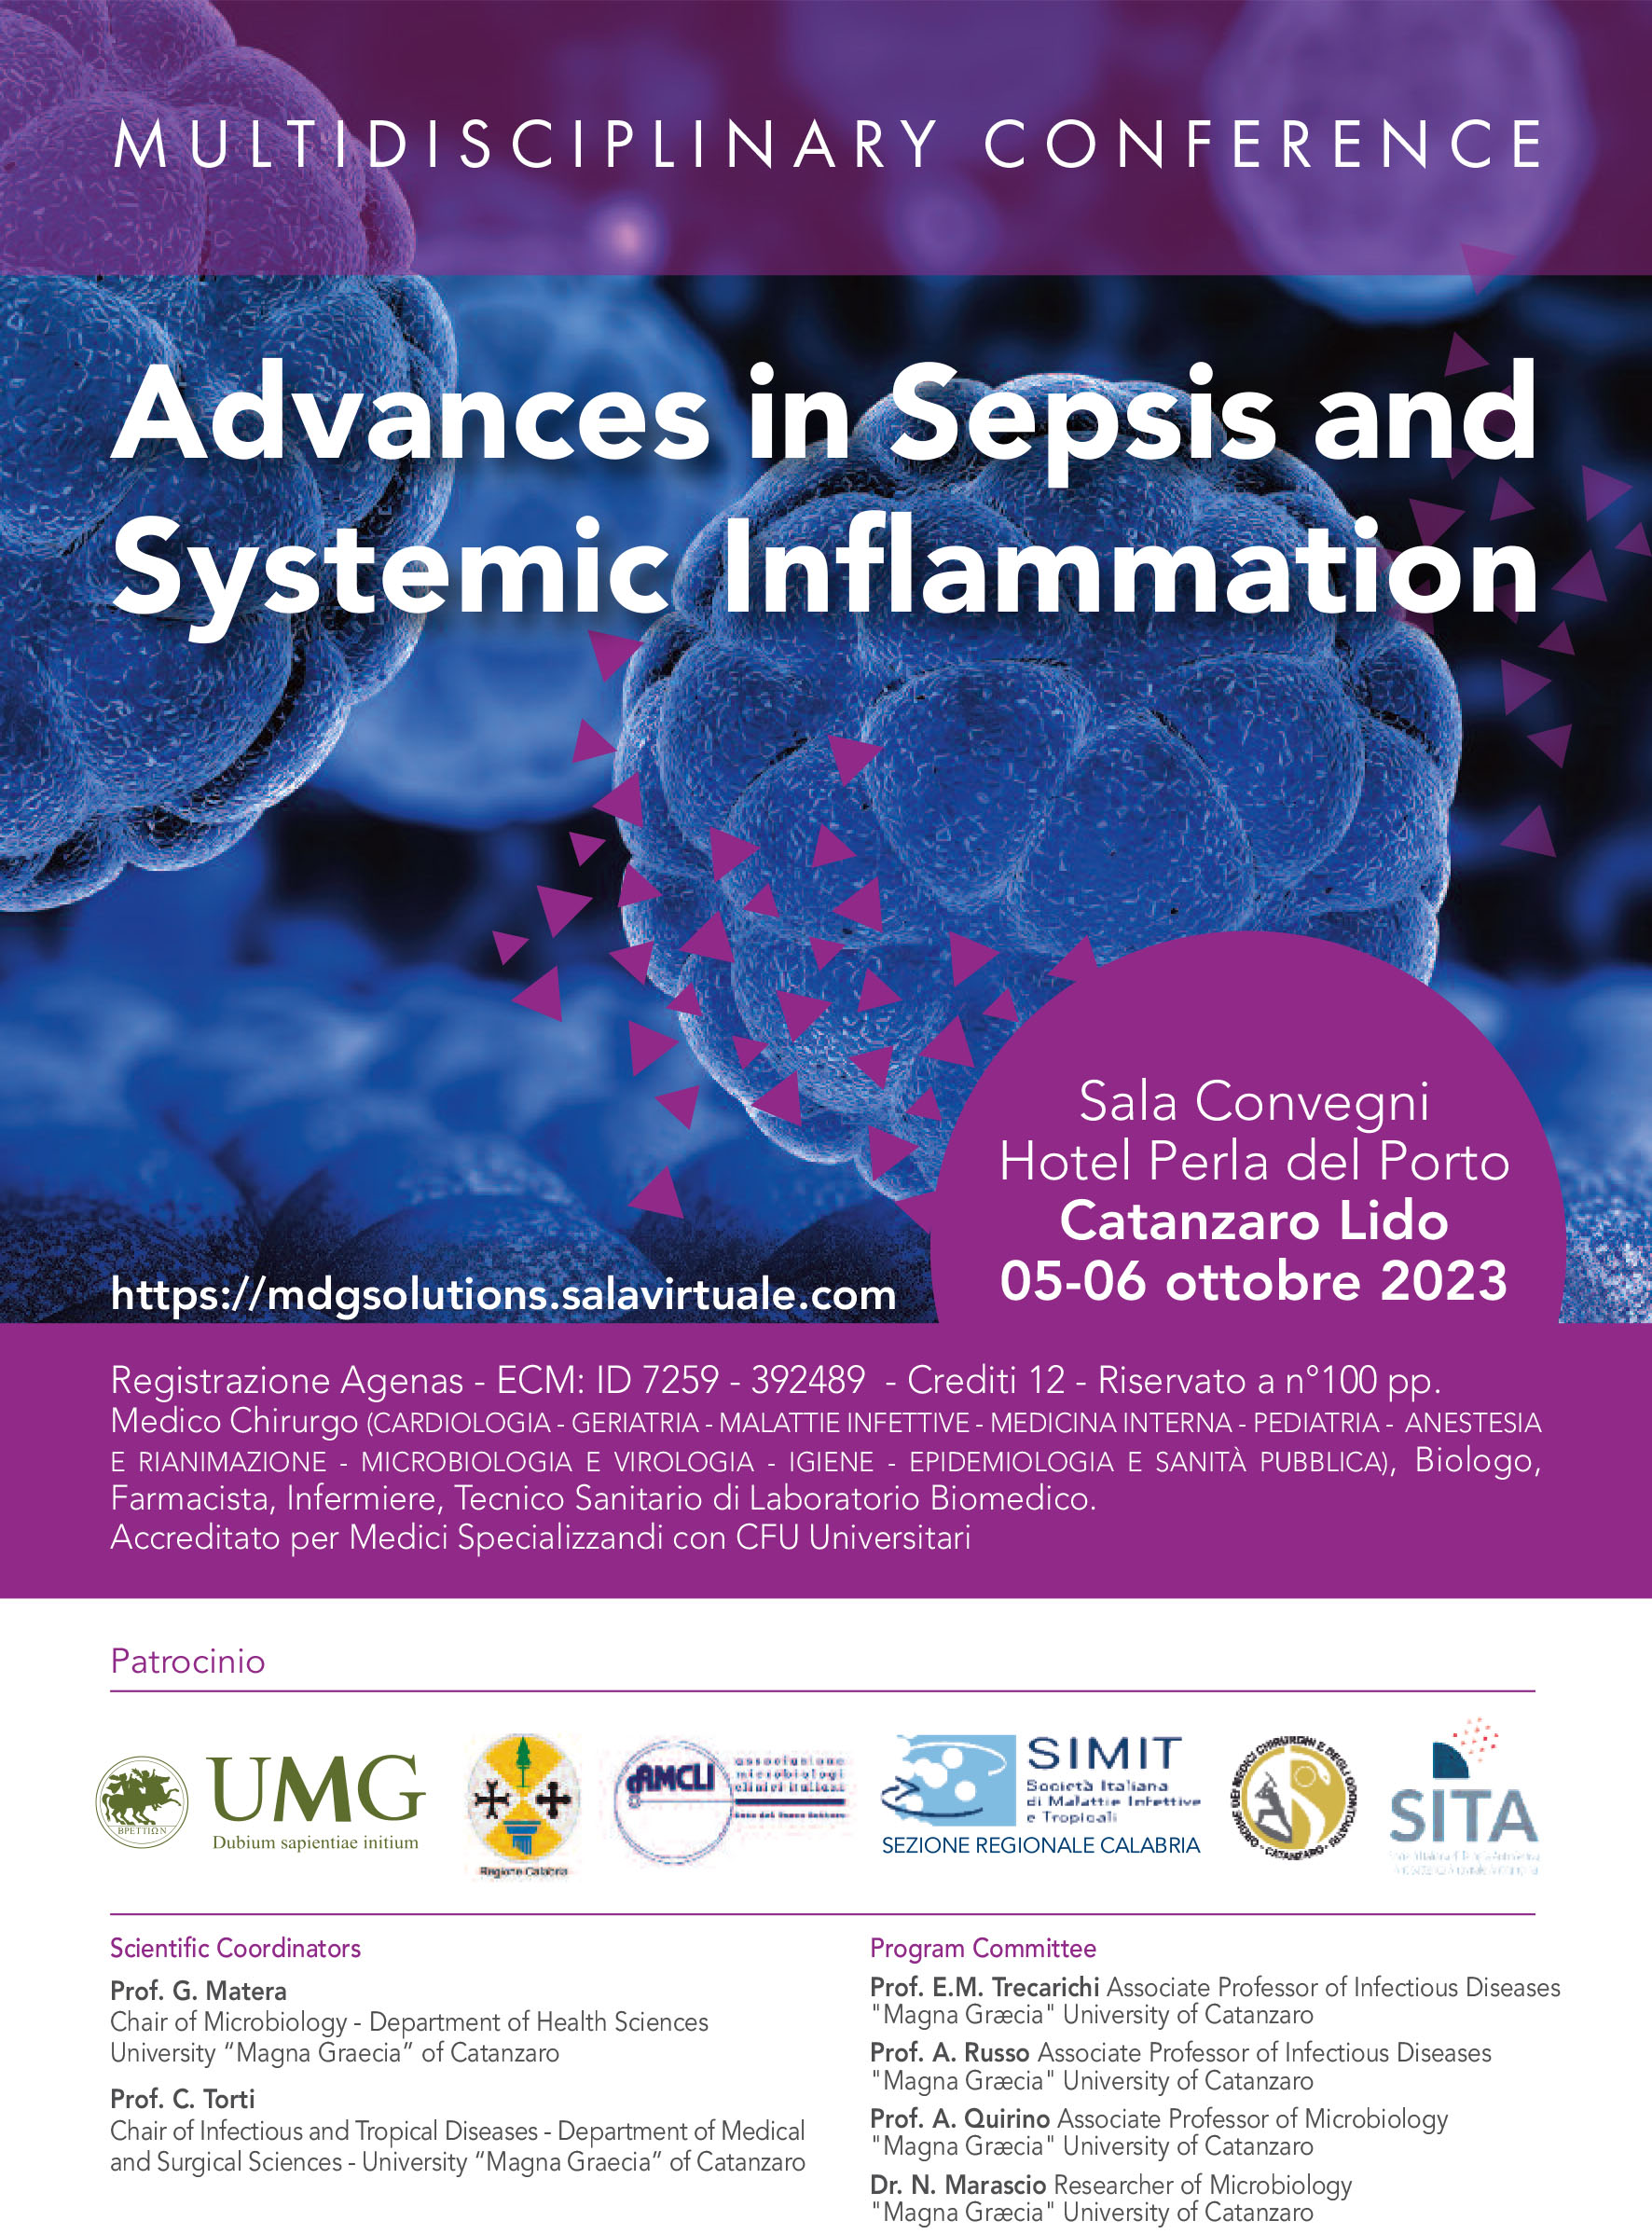 ADVANCES IN SEPSIS AND SYSTEMIC INFLAMMATION